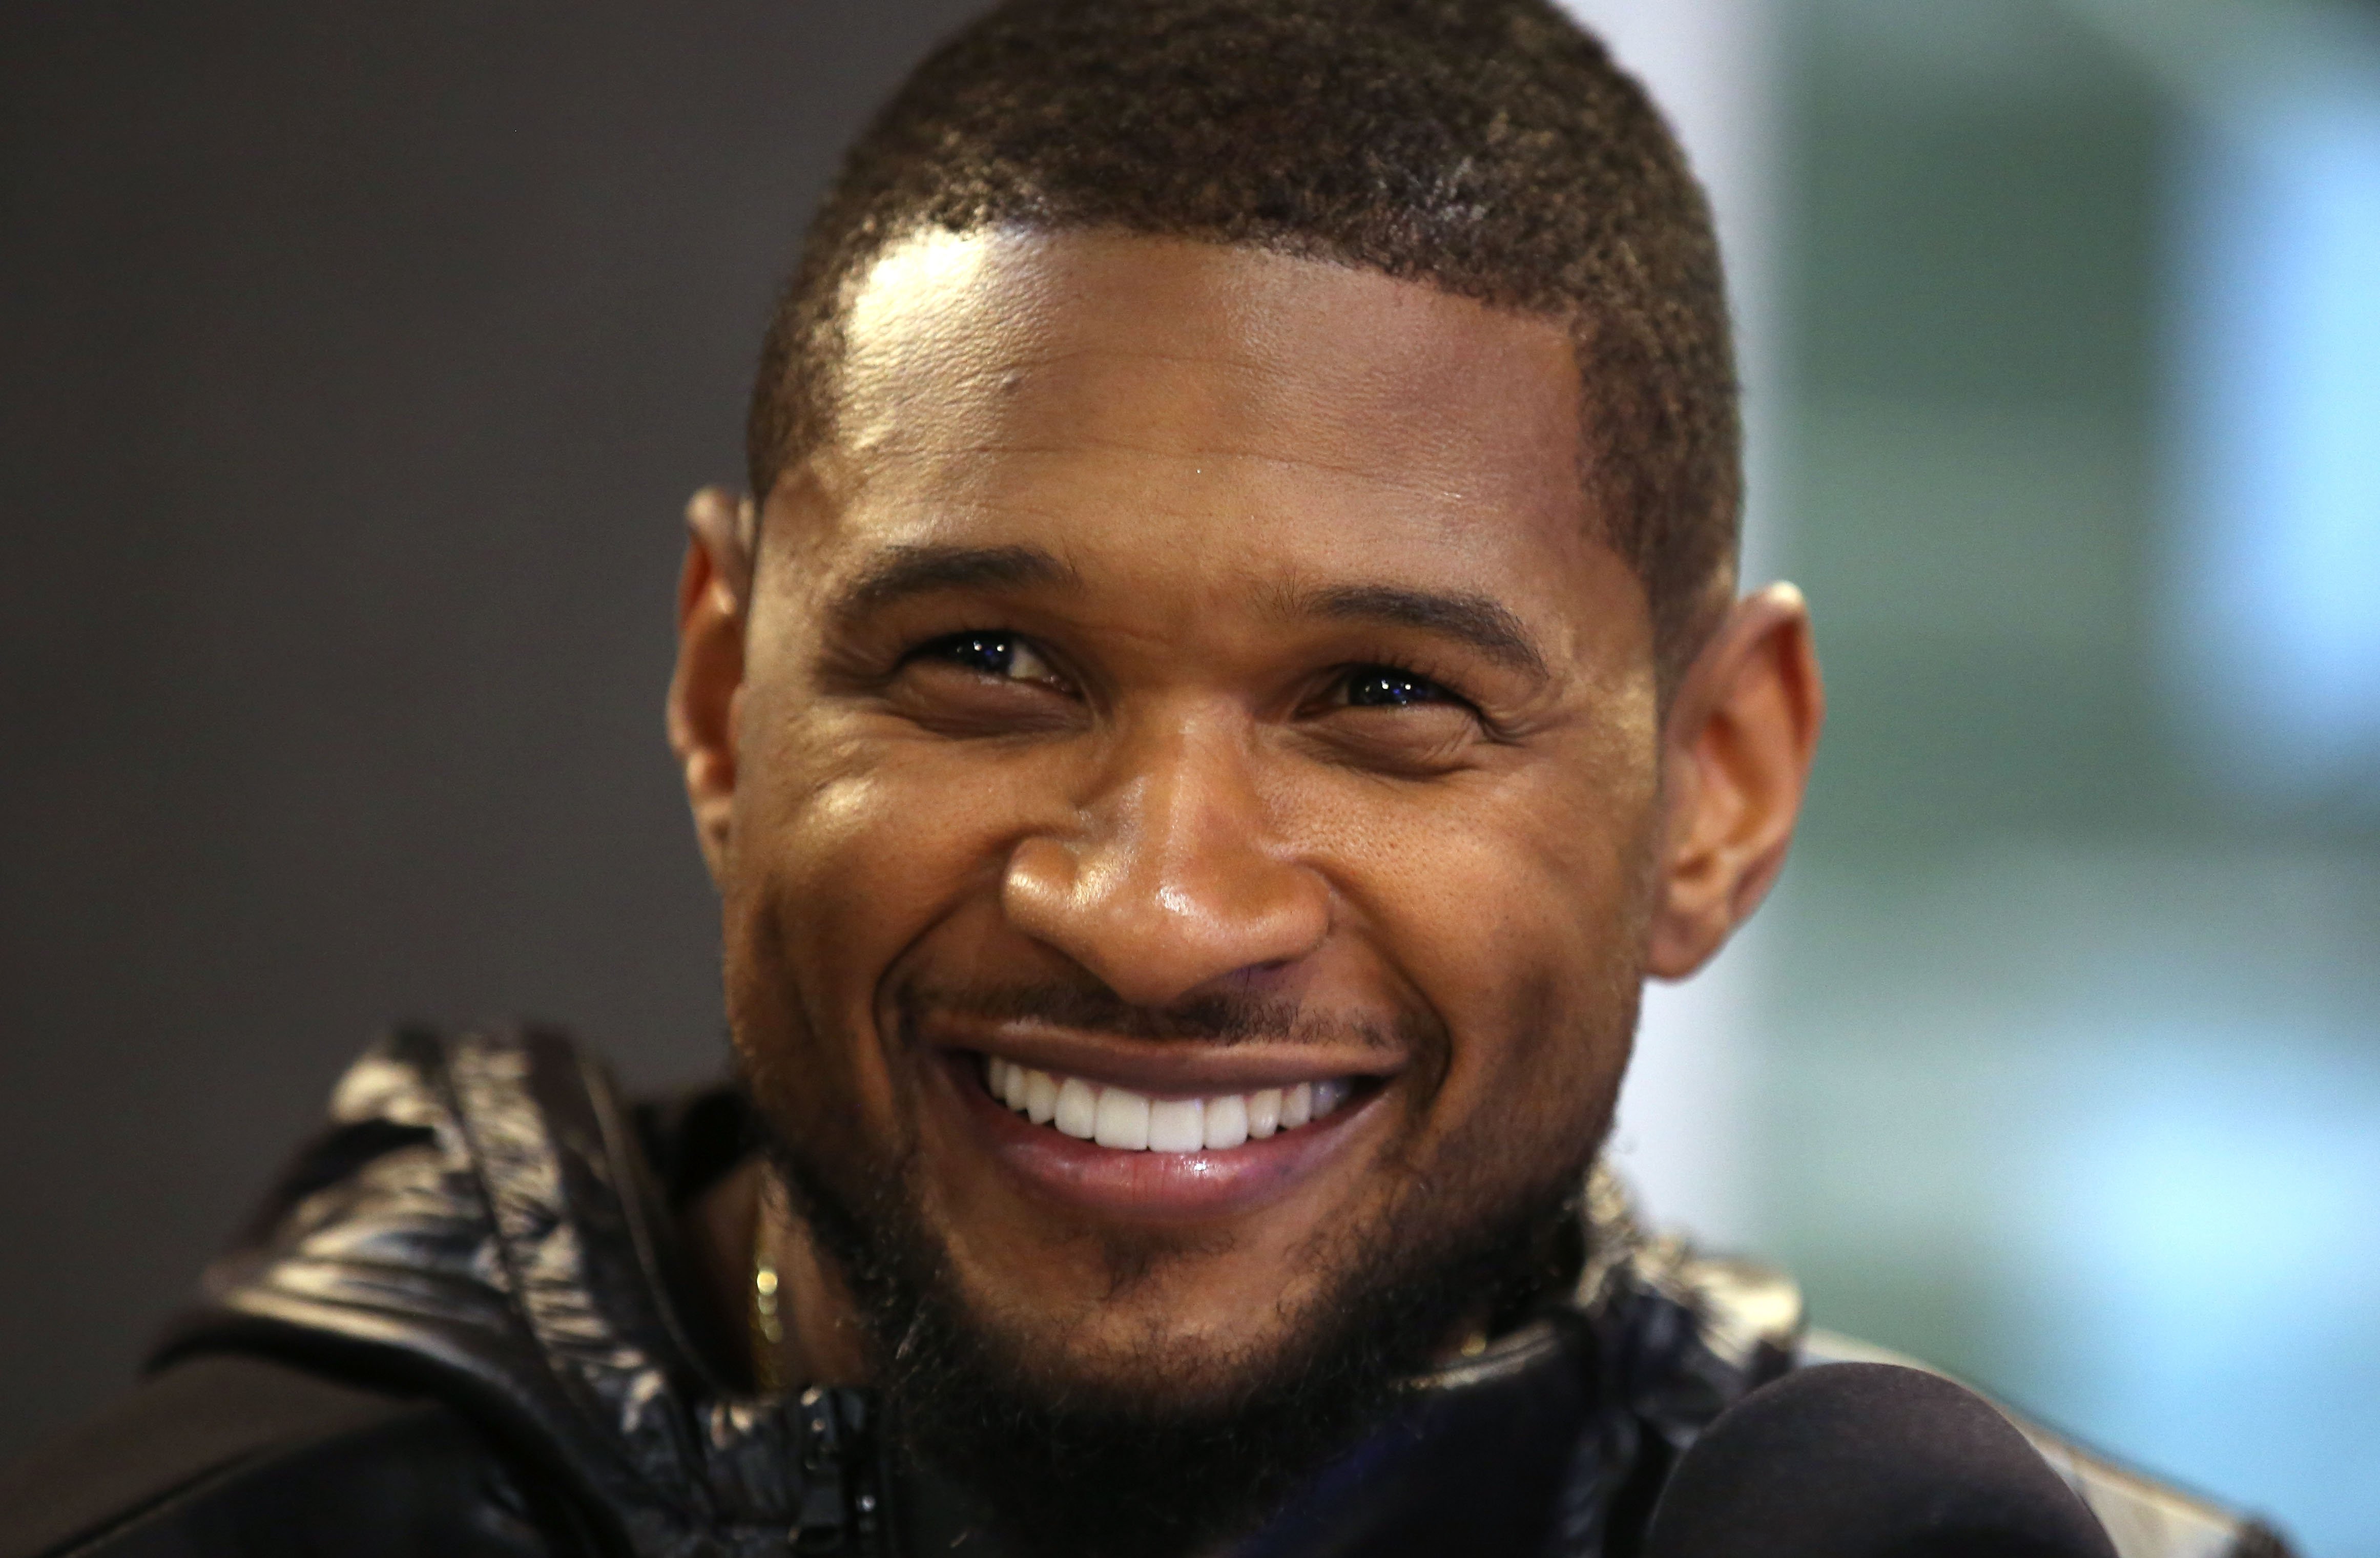 Usher visits the Kiss FM Studios in London, England on December 17, 2014. | Photo: Getty Images